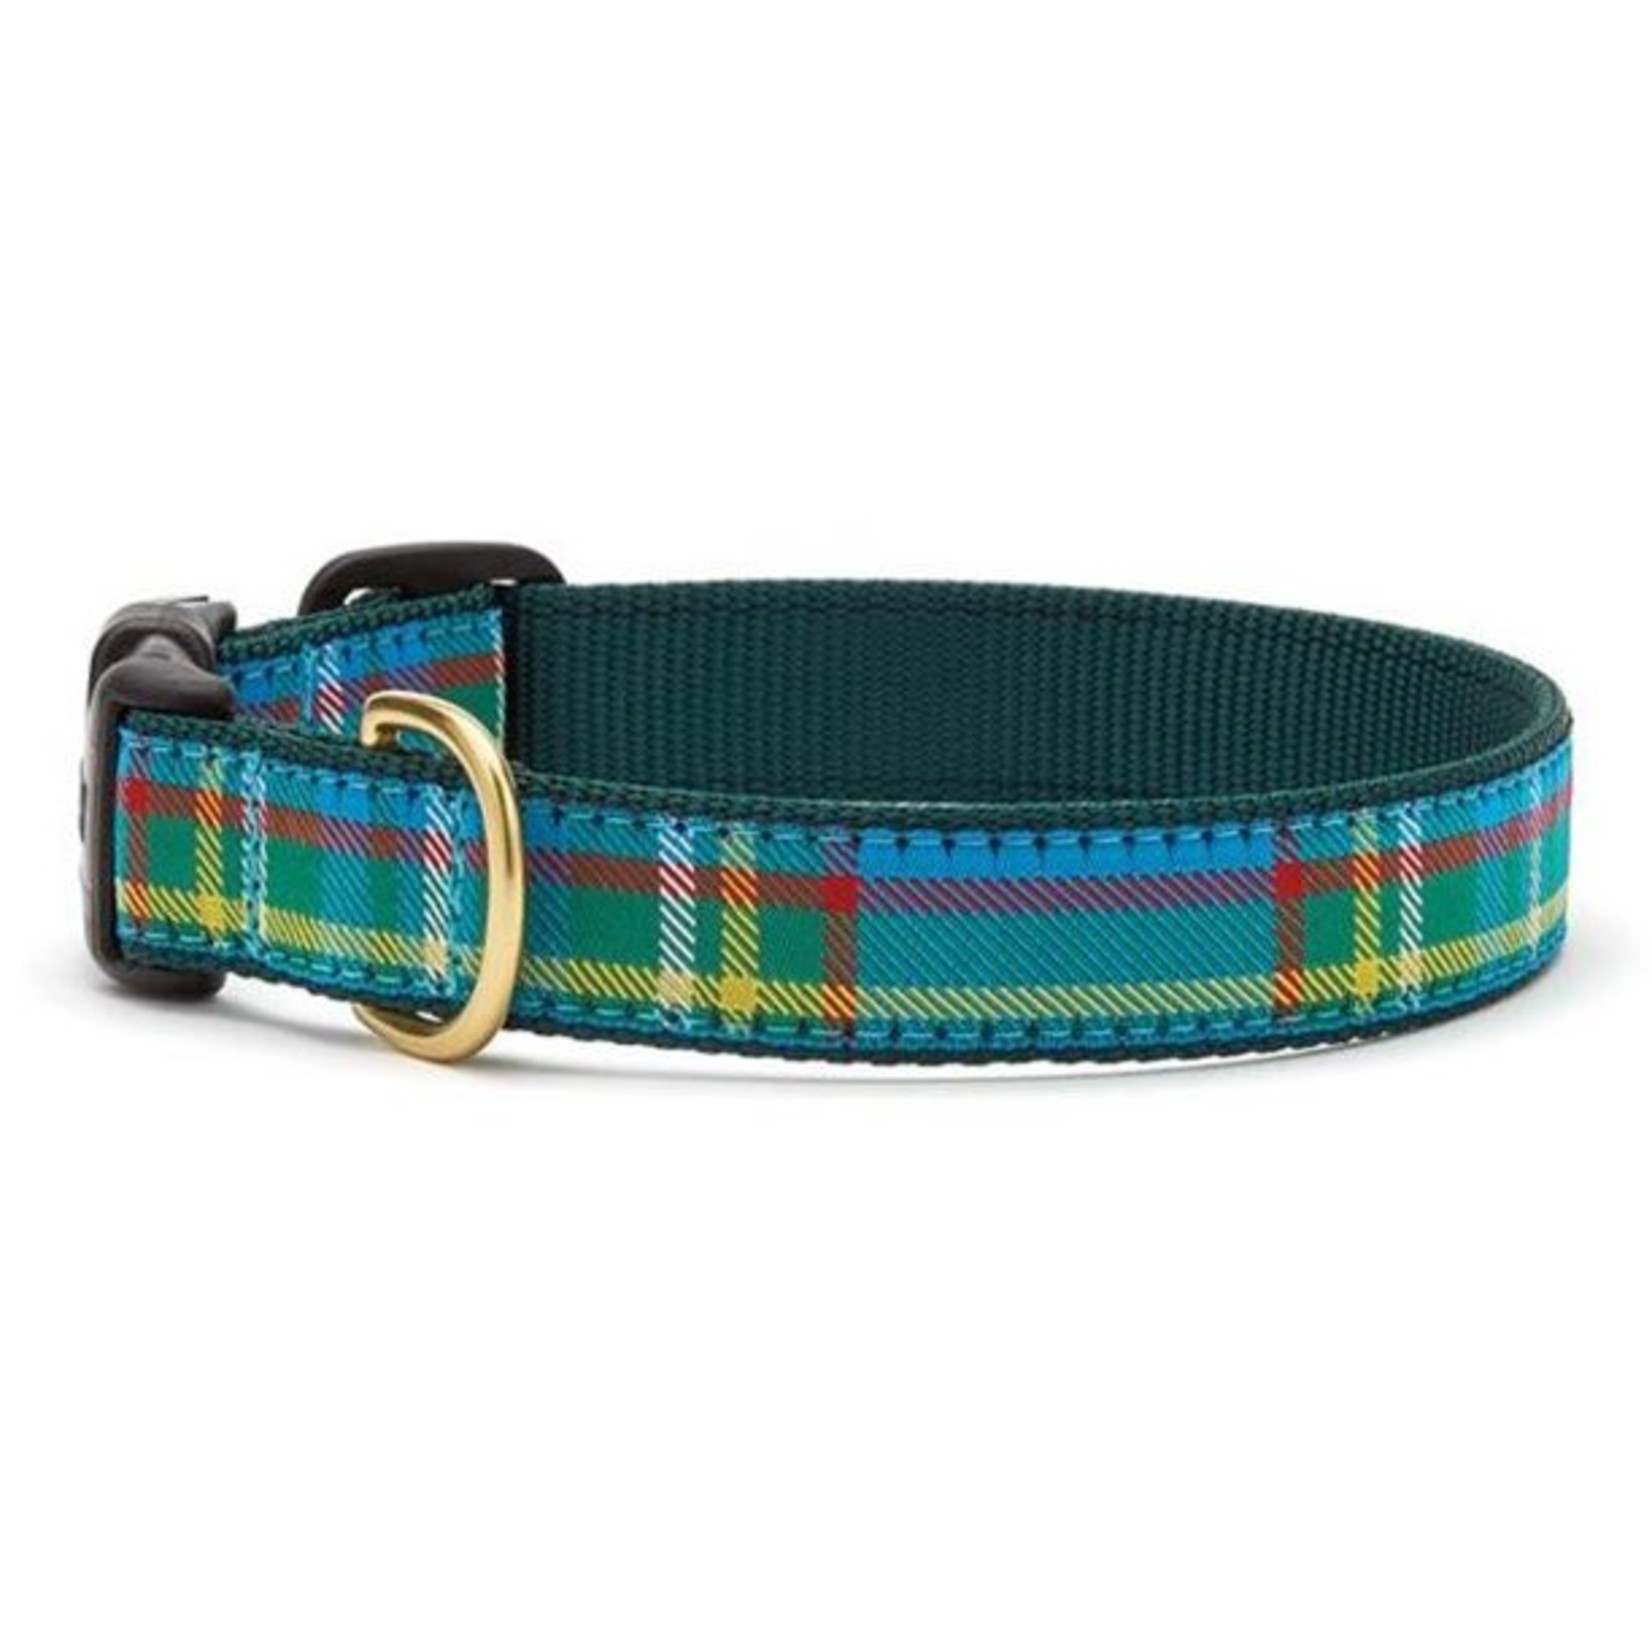 Up Country UPCOUNTRY Kendall Plaid Dog Collar - FINAL SALE, No Exchanges or Refunds